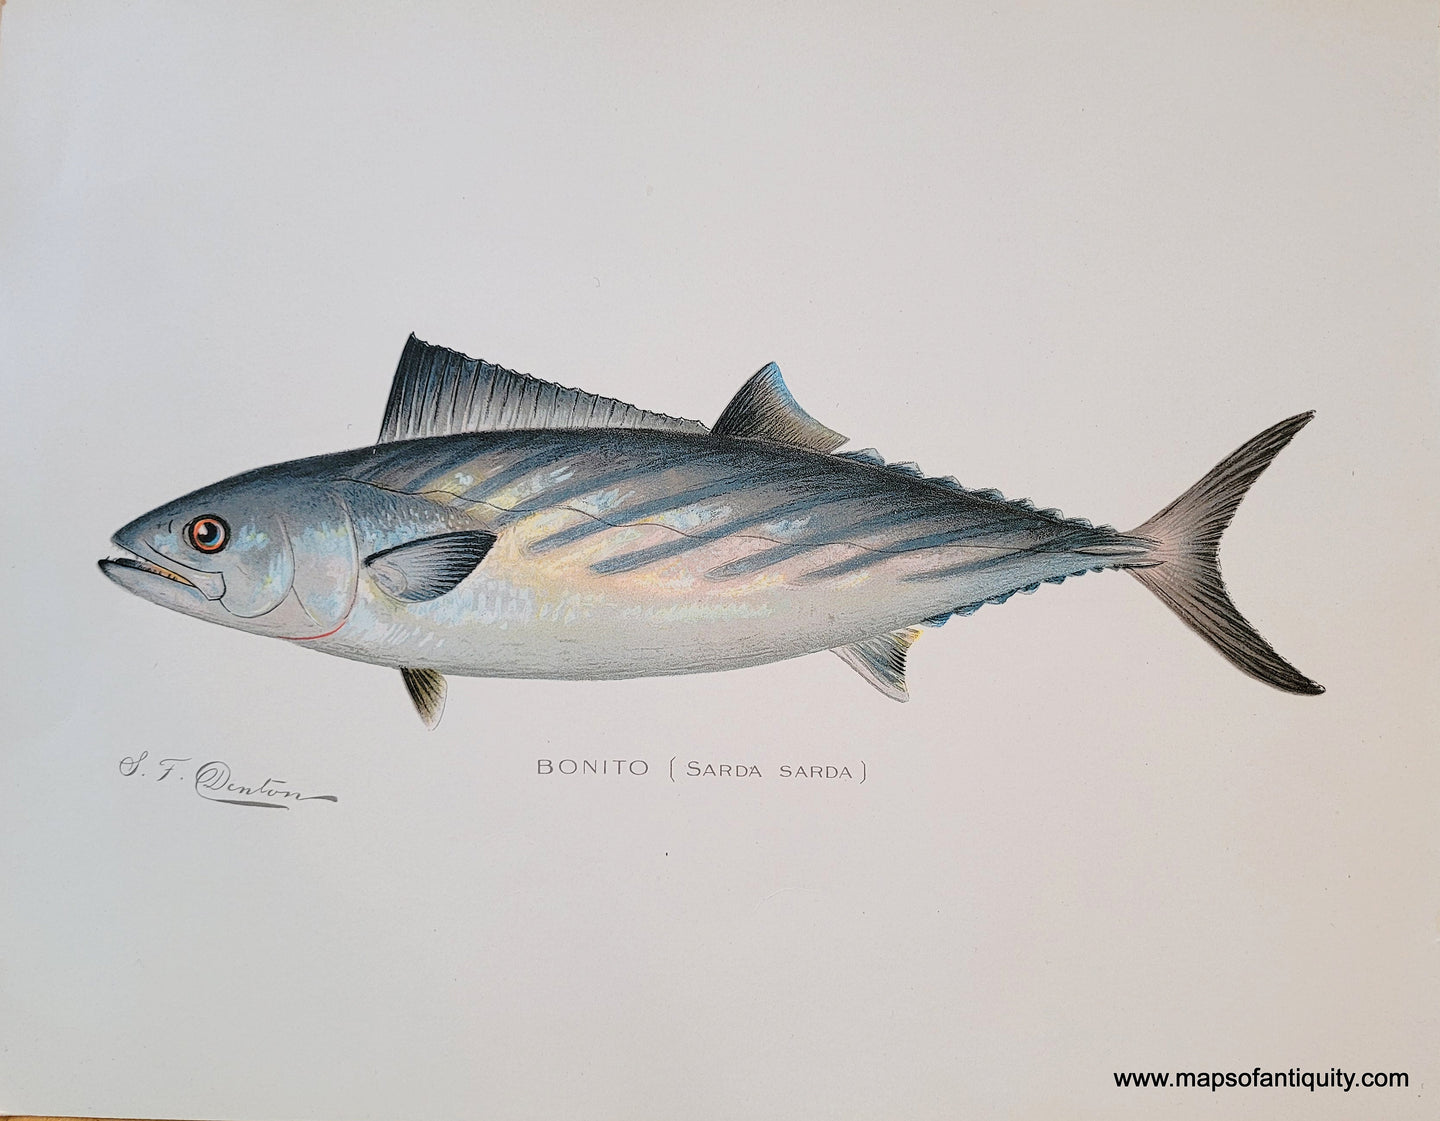 Antique print of a Bonito fish with gorgeous, carefully rendered chromolithograph colors by Denton, published in 1900. In the fish's scales are toned of pink, peach, icy blue, slate blue, warm yellow, and more. The fish has an orange and blue eye.